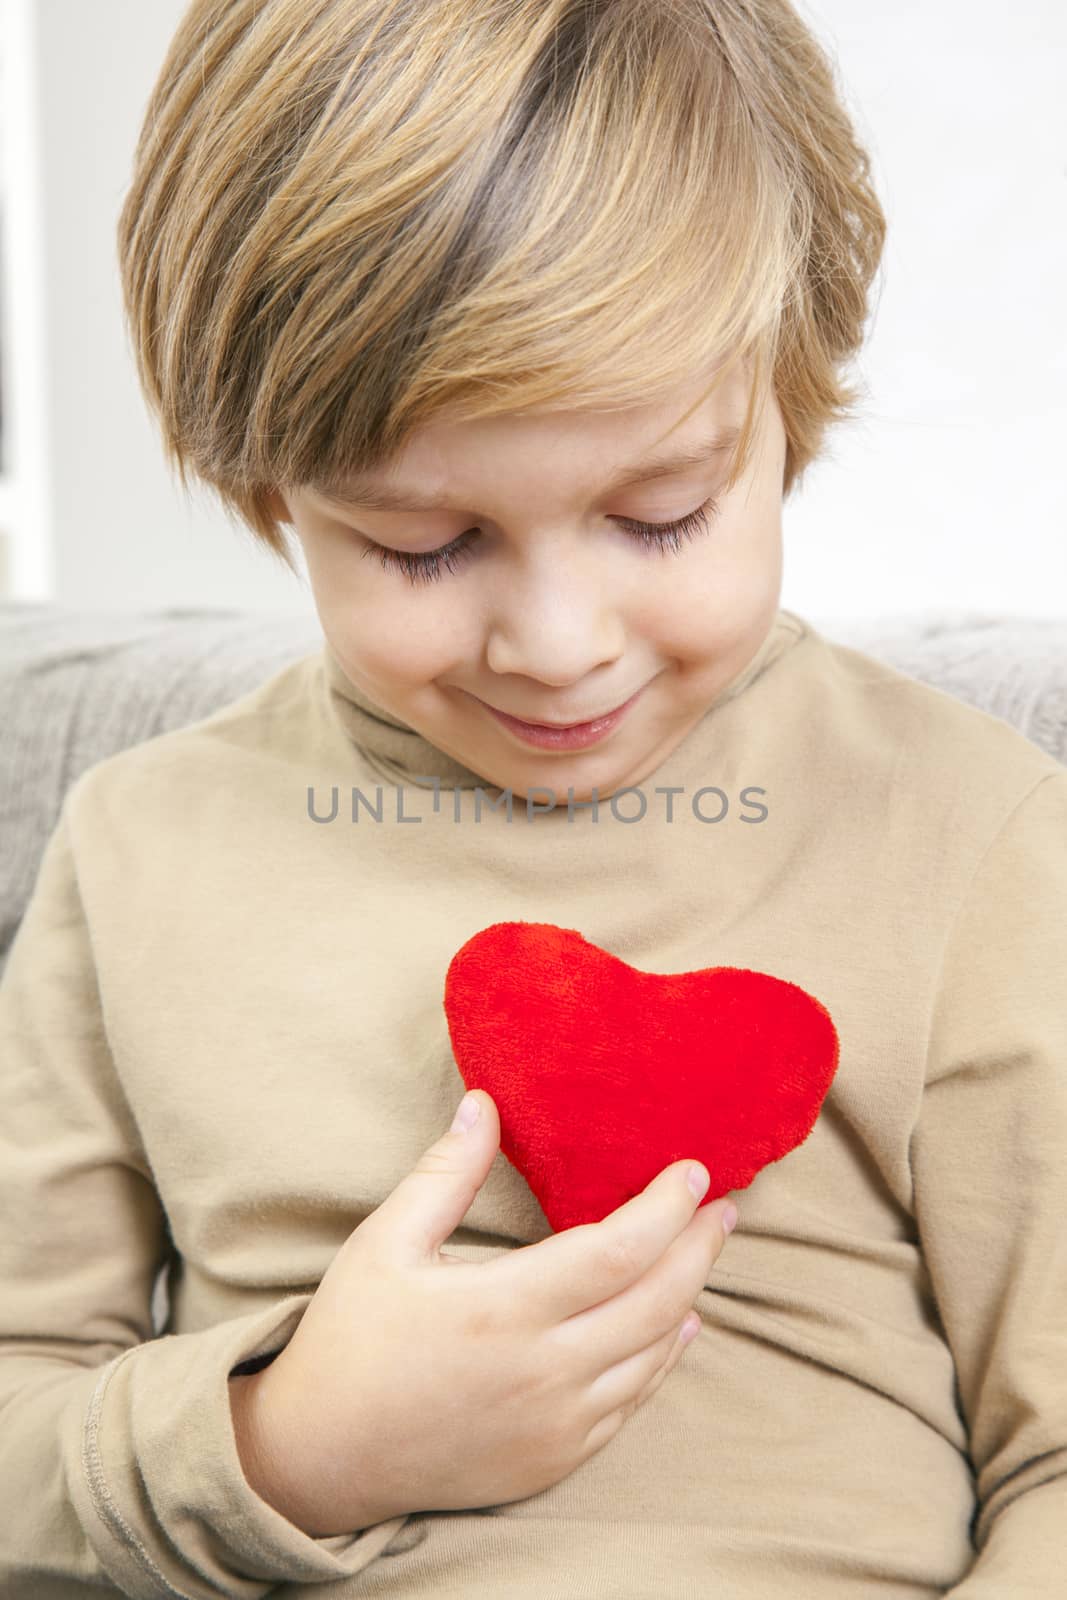 ��ute young boy with a red heart  by anelina